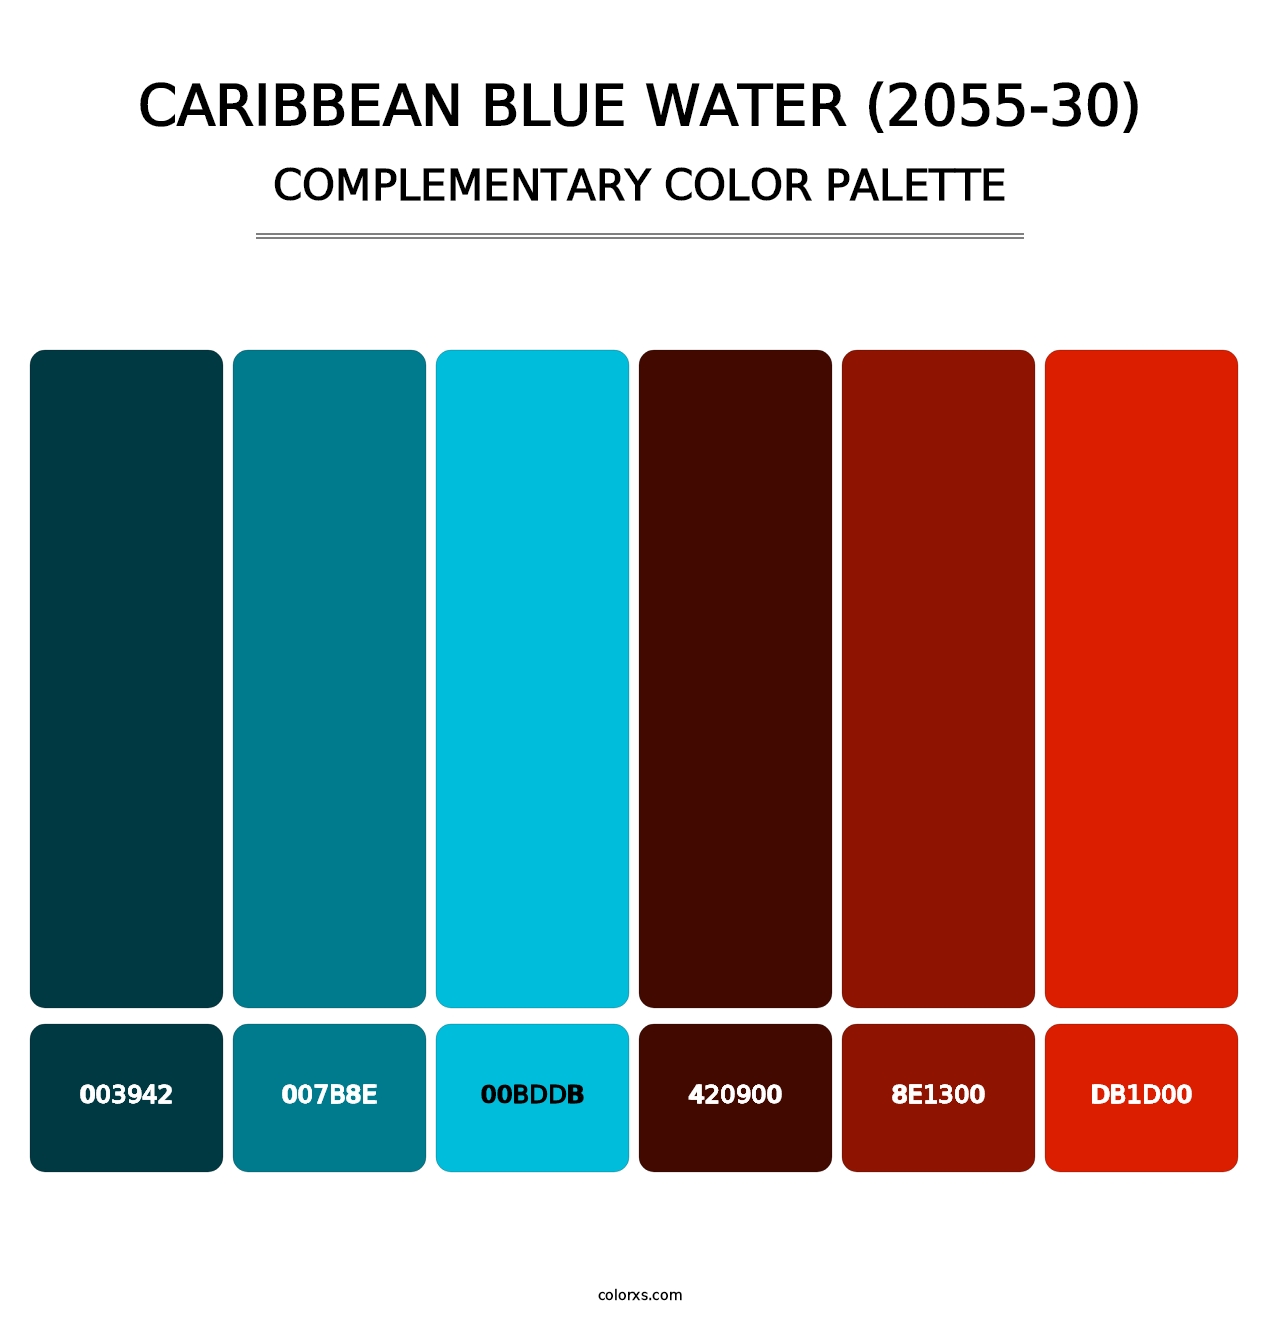 Caribbean Blue Water (2055-30) - Complementary Color Palette